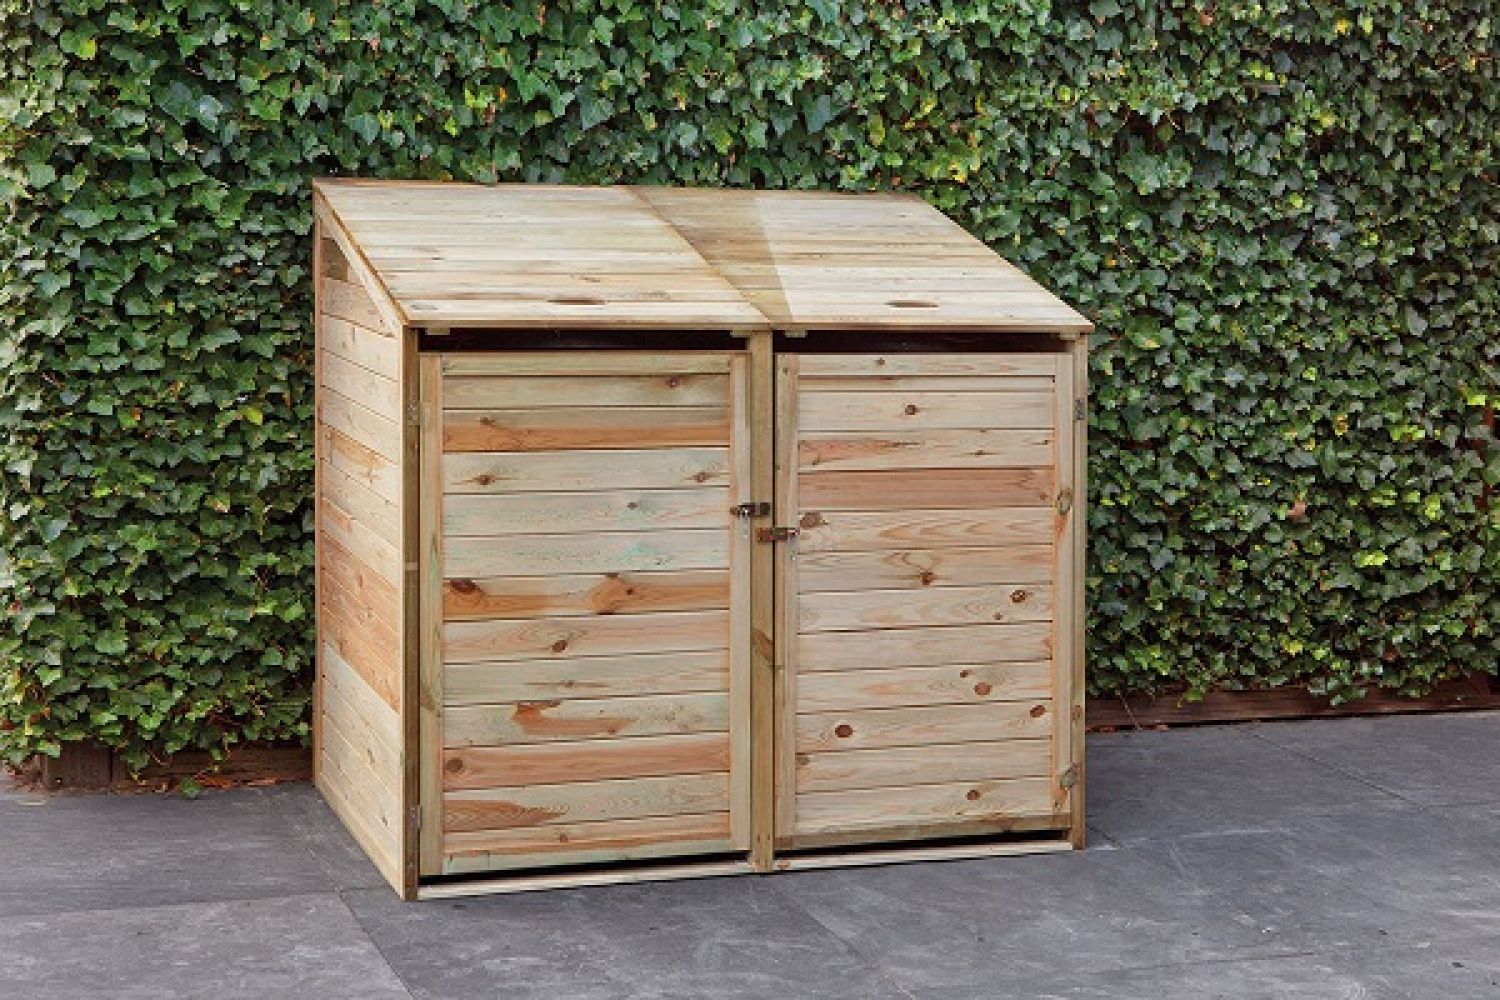 Containerberging dubbel 140x85x135 cm